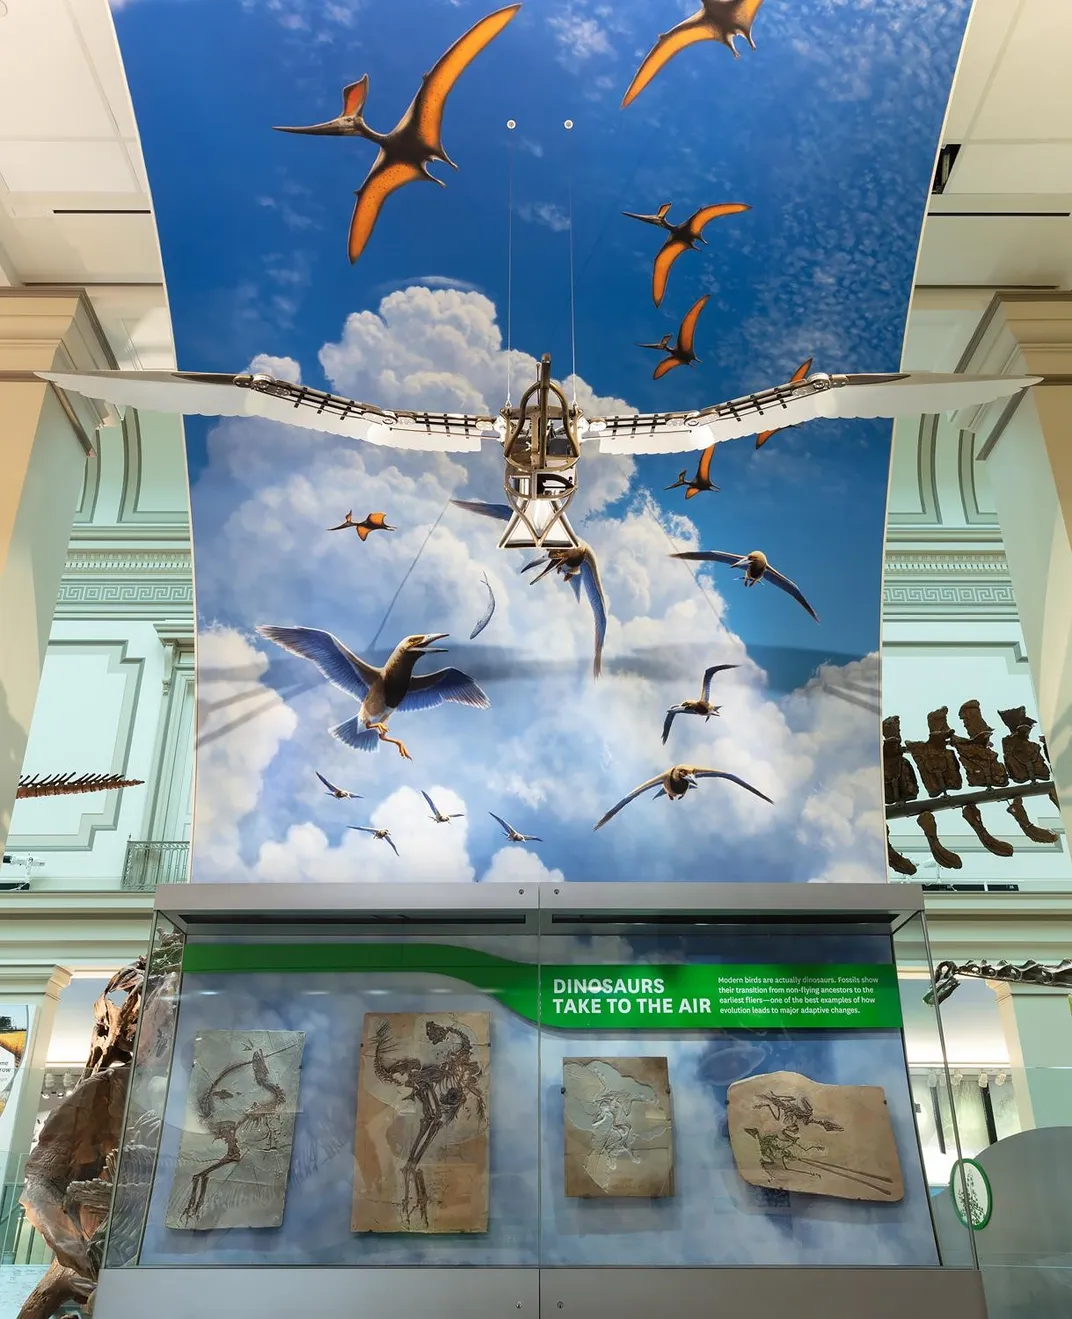 A museum exhibit display of flying dinosaurs.